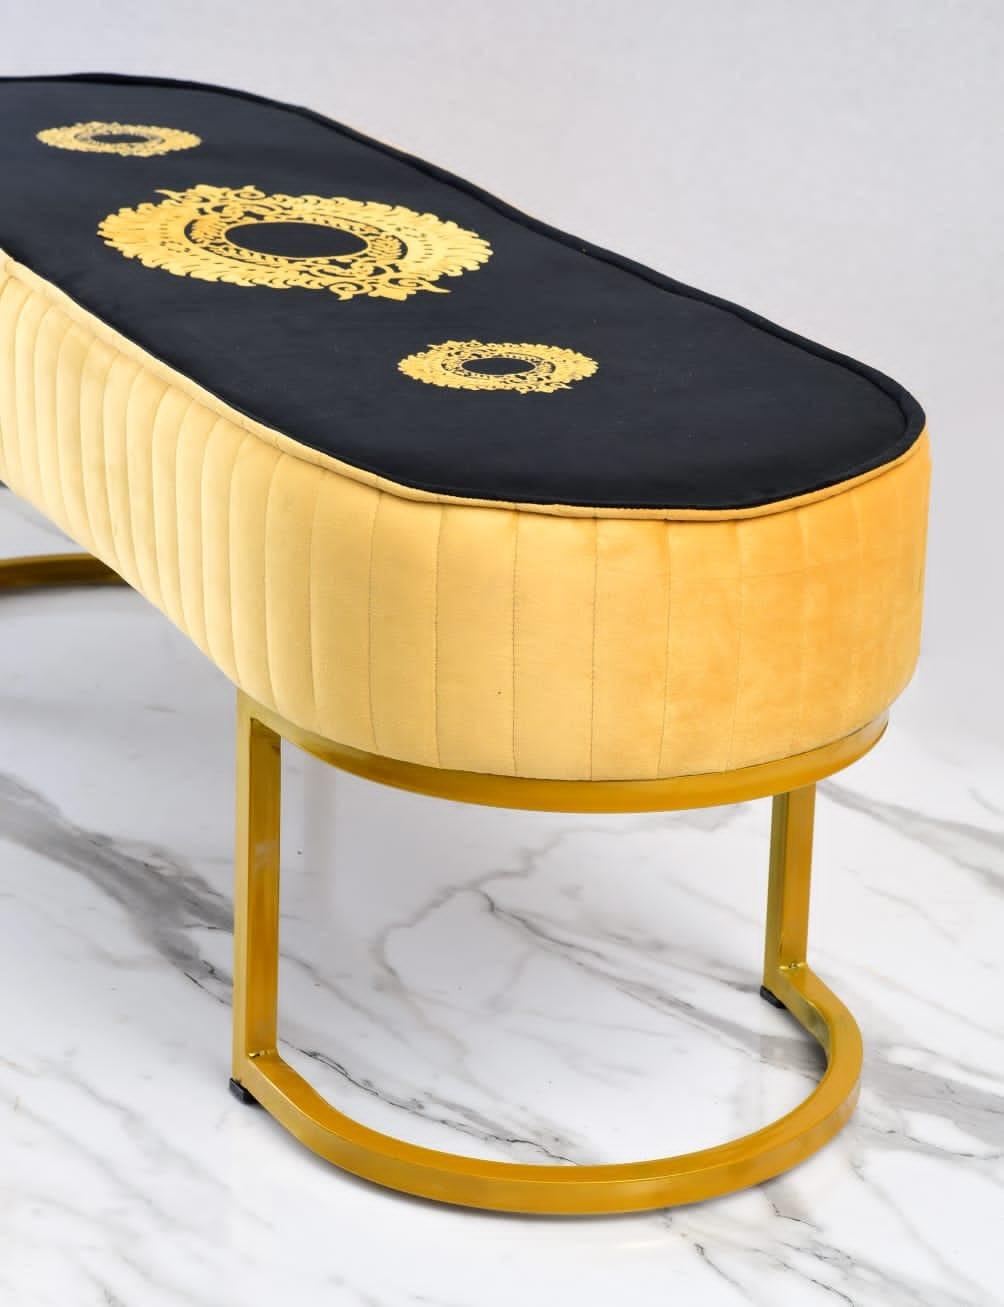 3 Seater Luxury Embroidered Stool With Steel Stand -1163 - 92Bedding